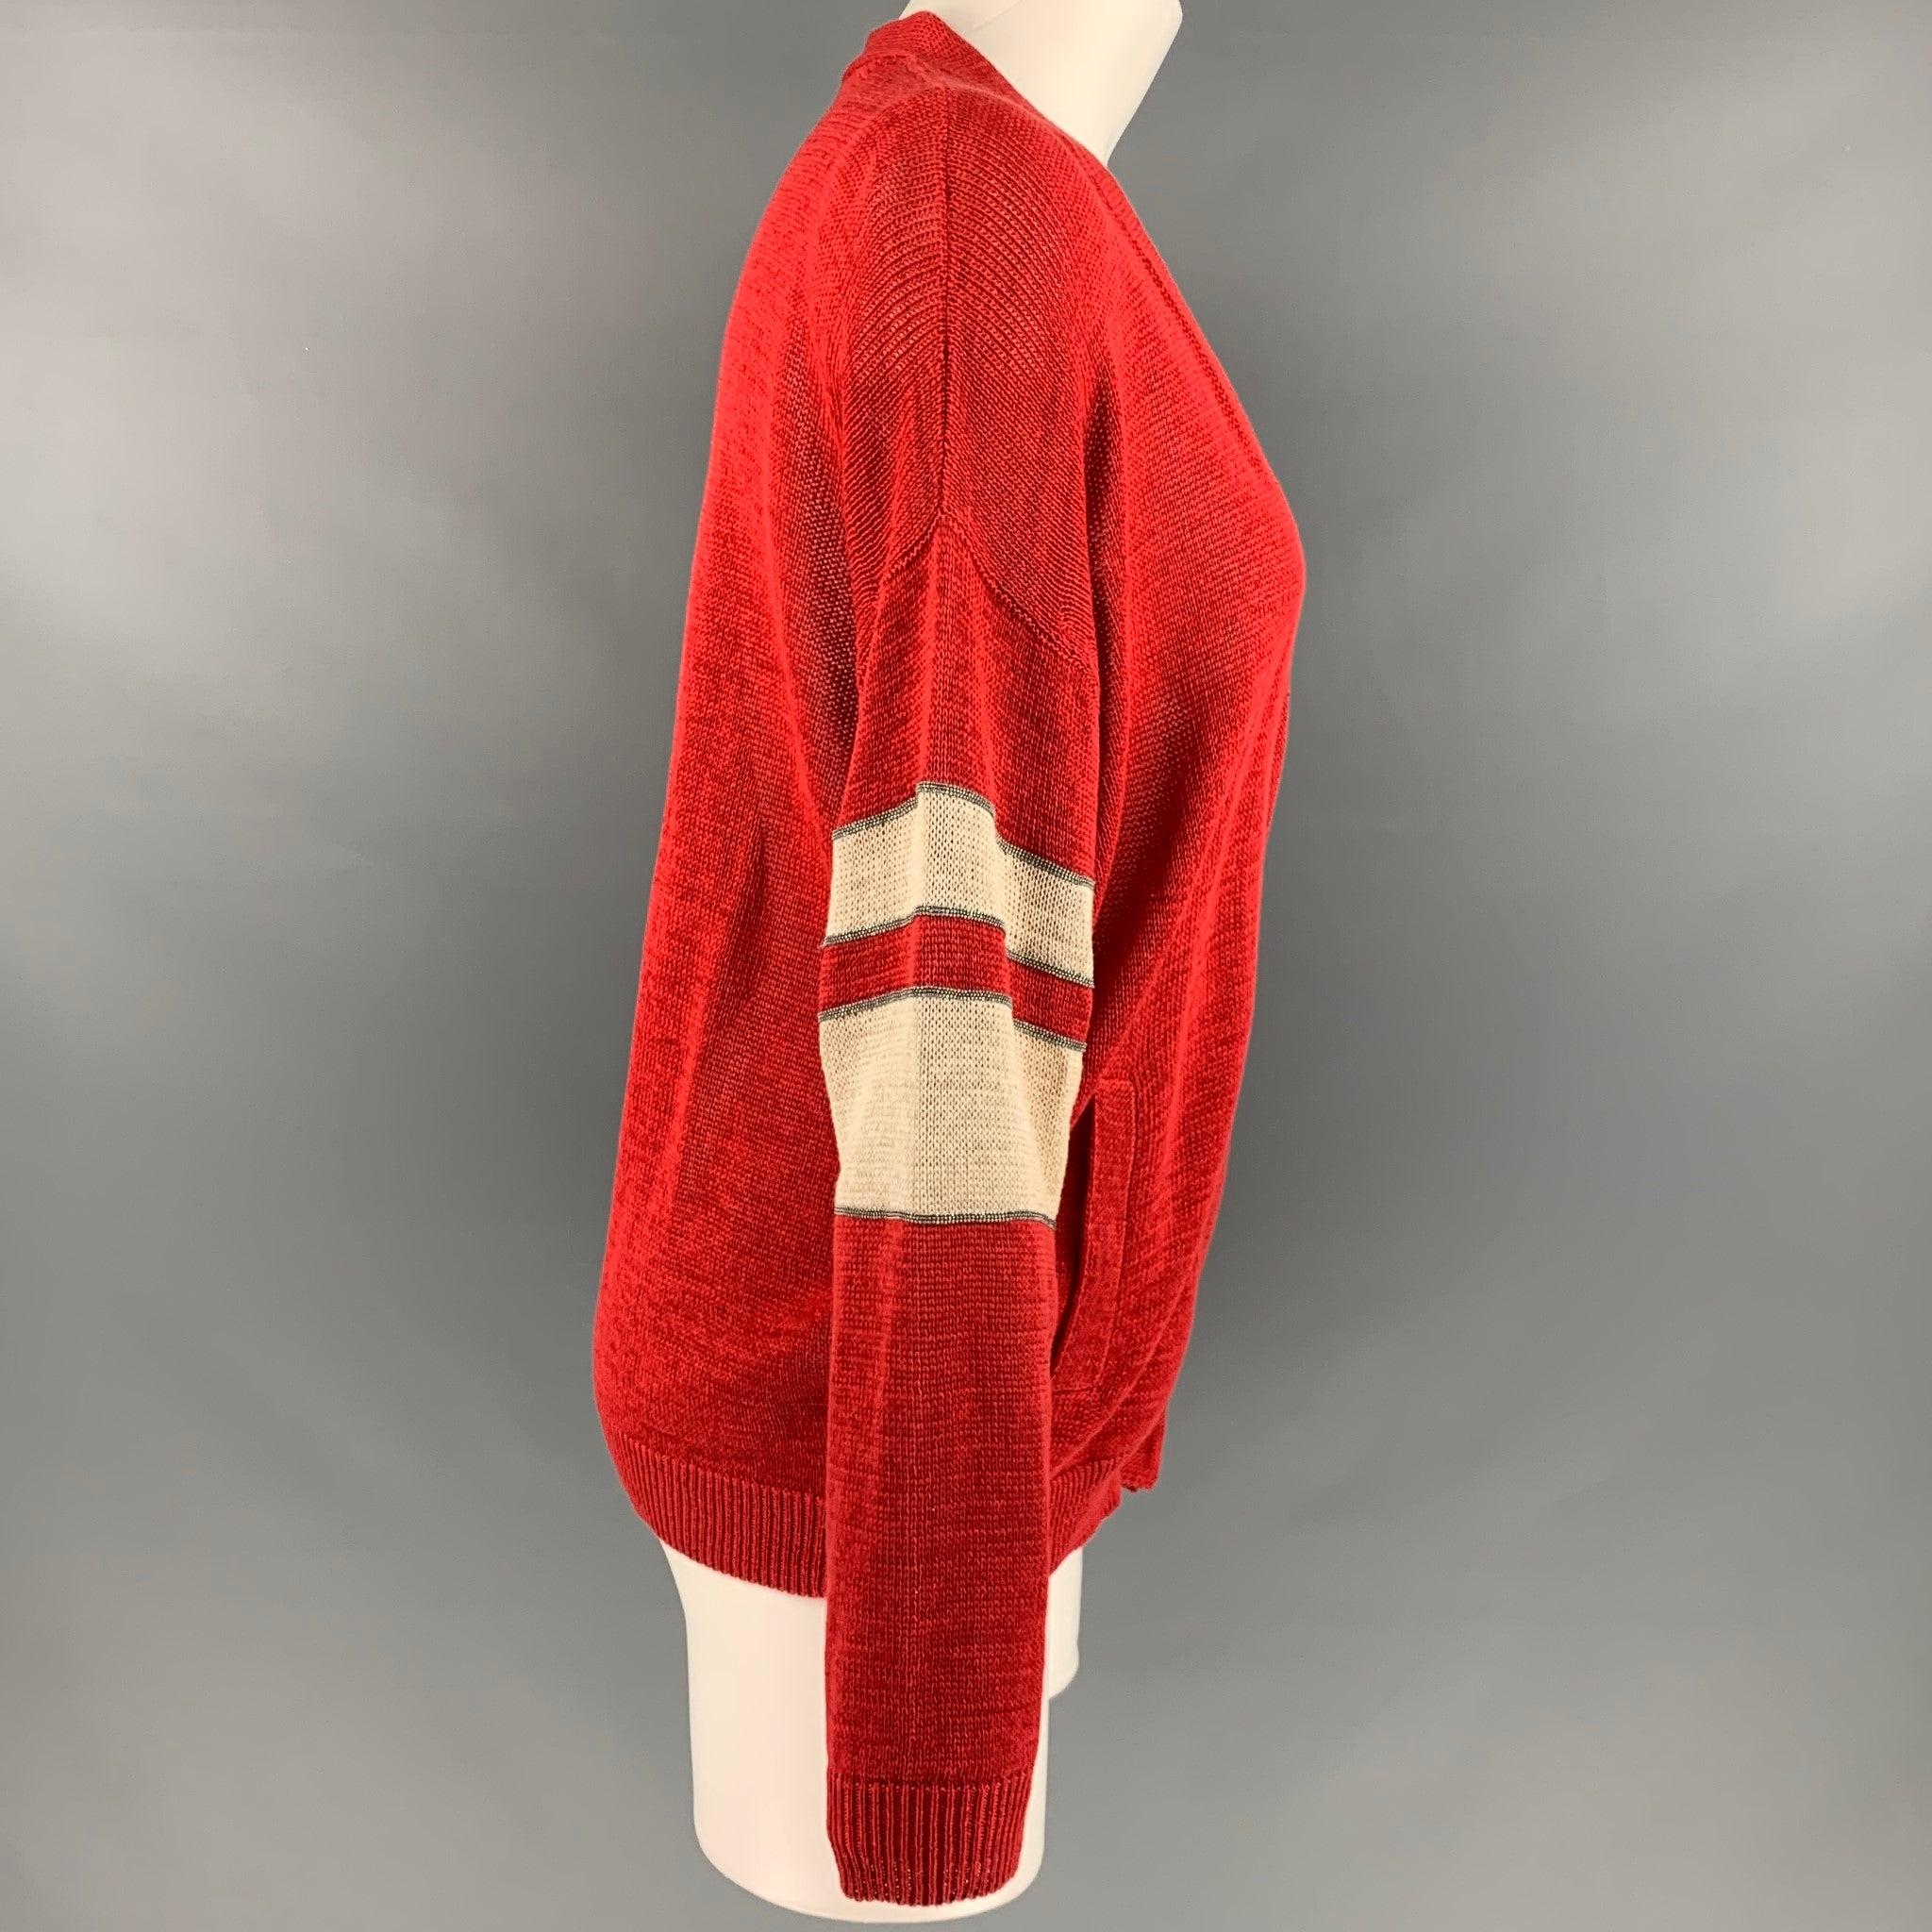 BRUNELLO CUCINELLI
cardigan in a red and white cotton knit fabric featuring signature Monili beading, stripe details, oversized fit, and a hidden snap closure. Made in Italy. Very Good Pre-Owned Condition. Minor signs of wear. 

Marked:   S